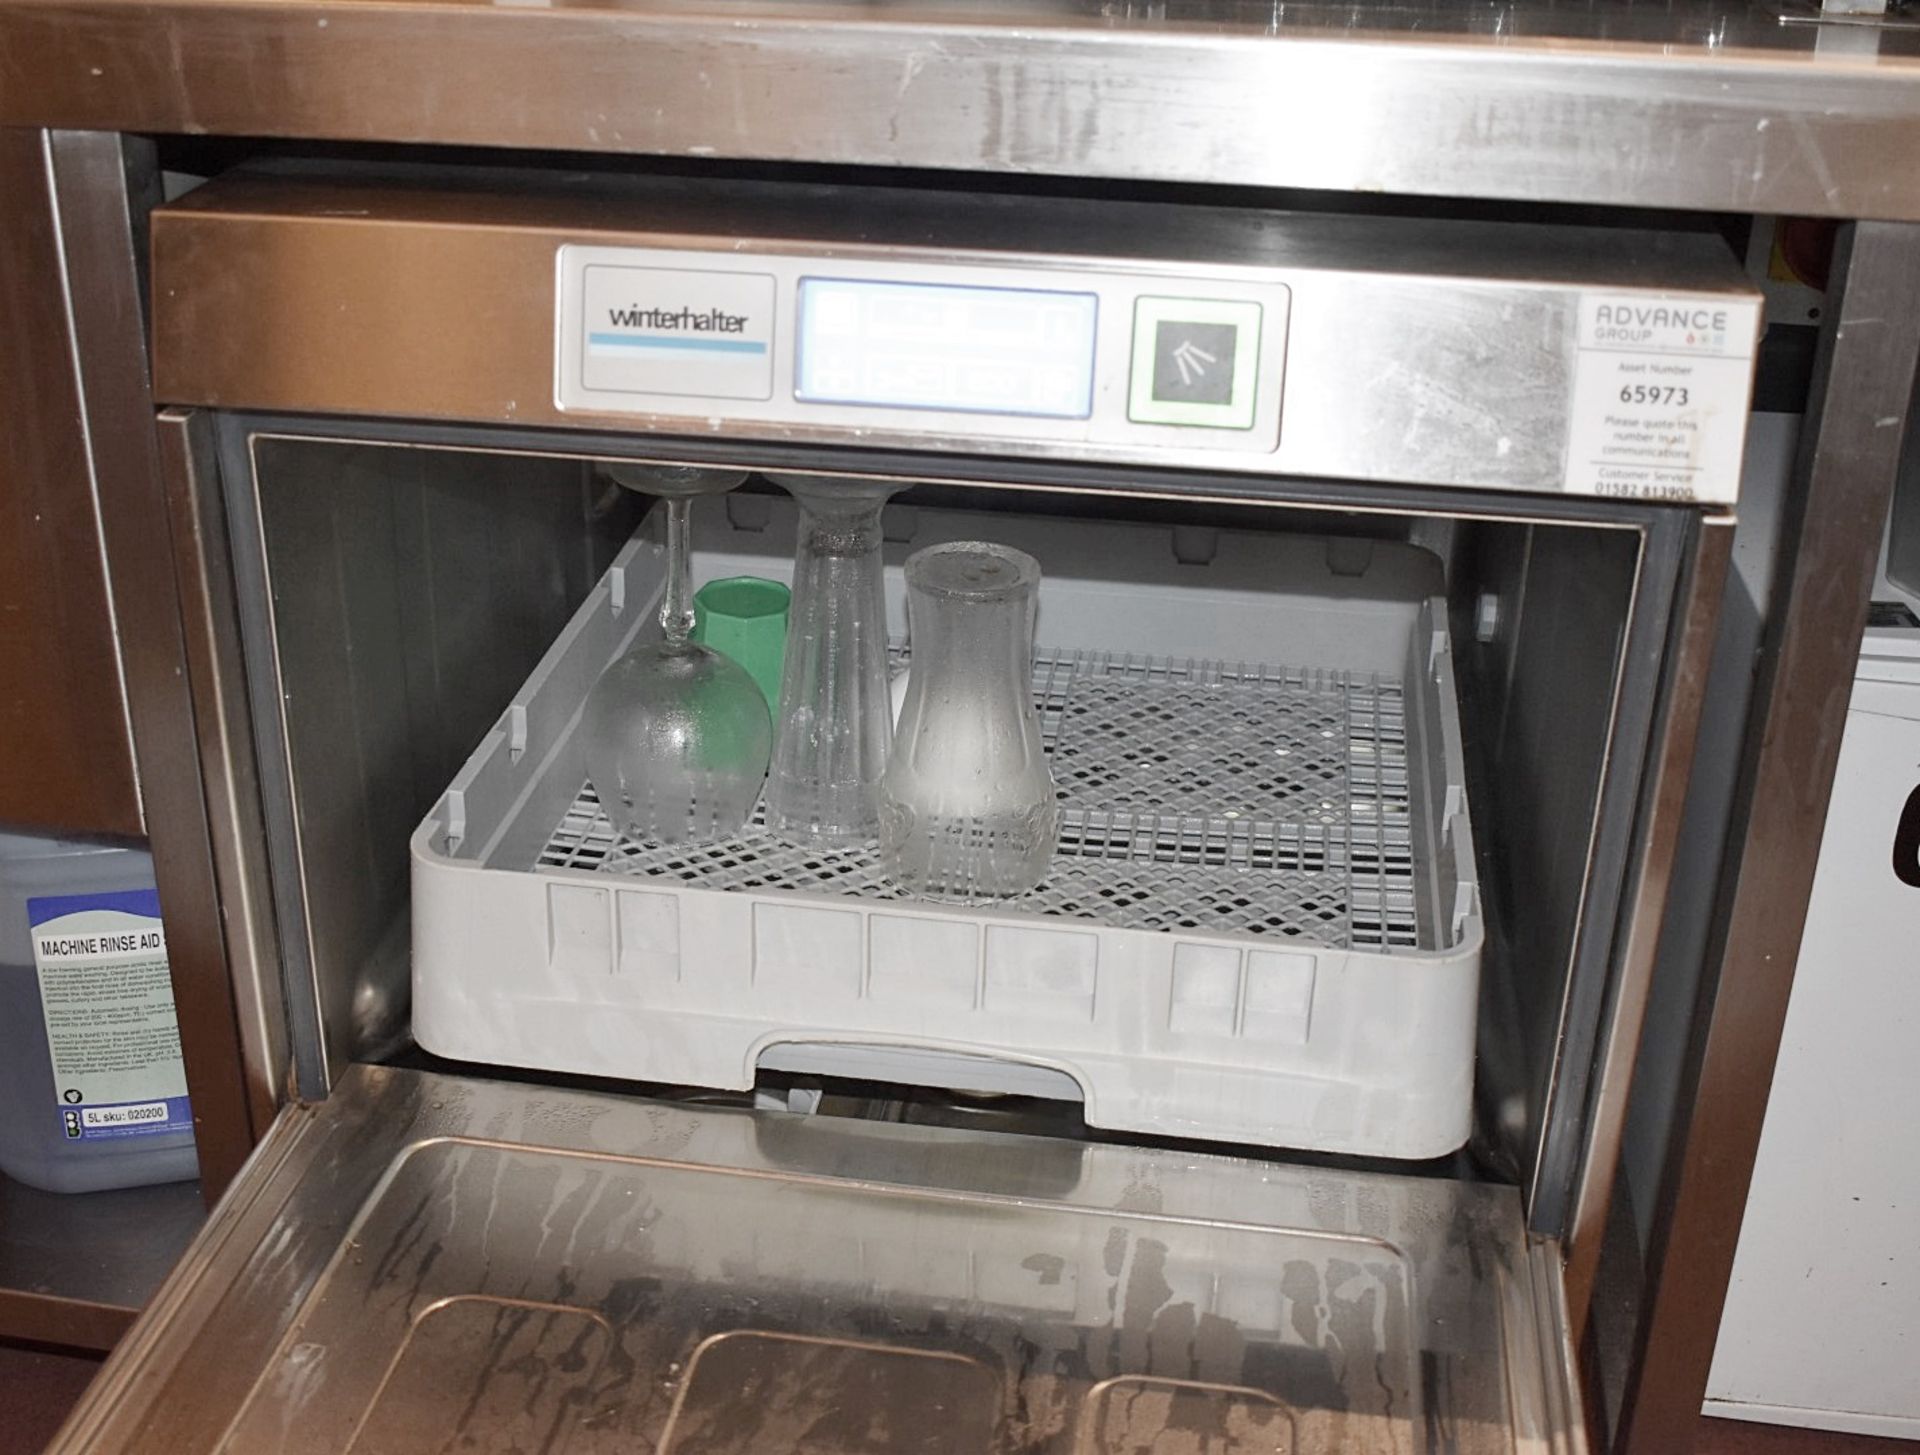 1 x Winterhalter UC-M Commercial Backbar Glass Washer With Stainless Steel Finish - 240v Single - Image 4 of 4